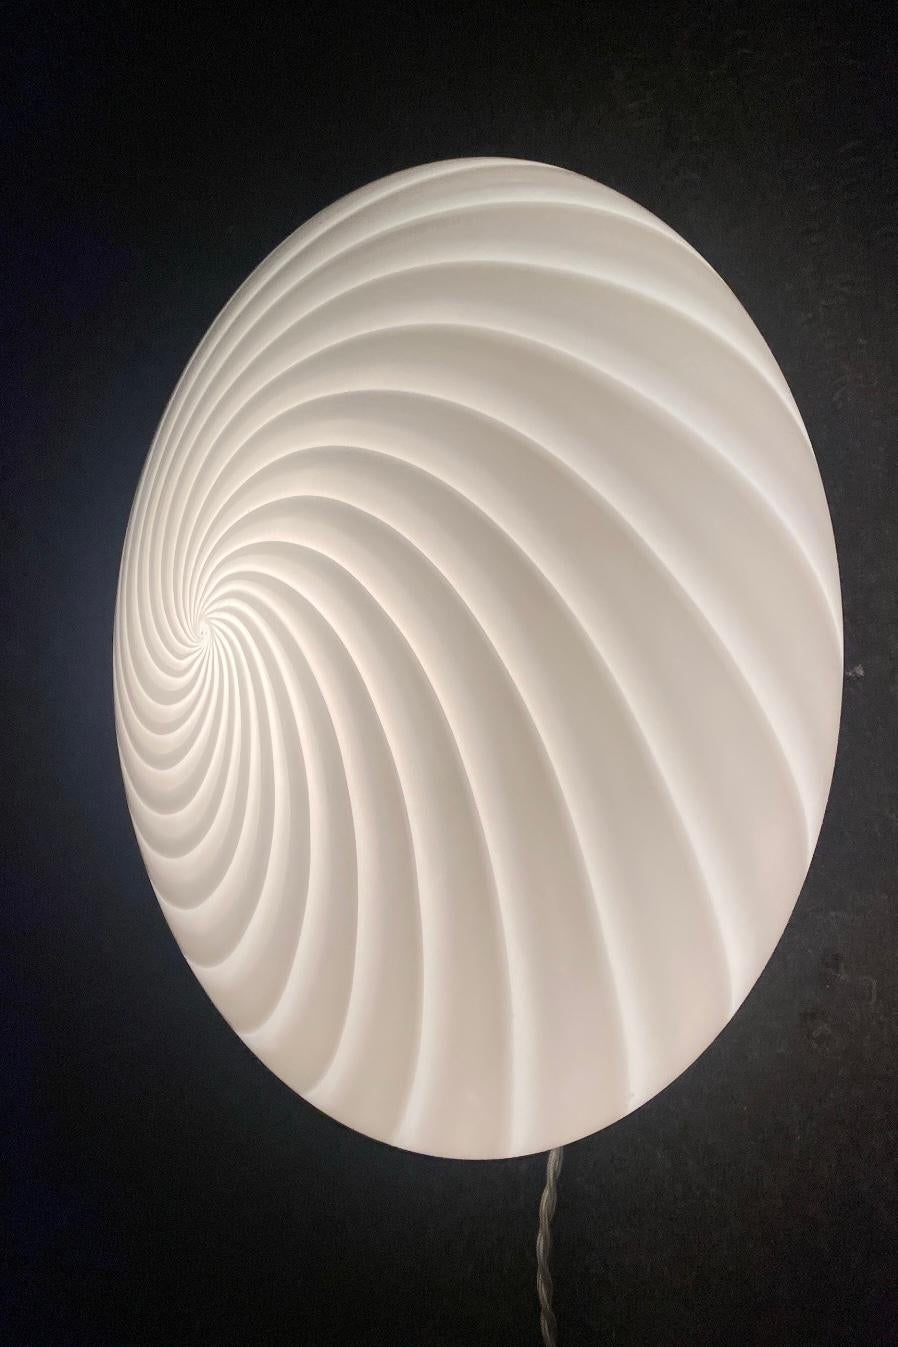 Large Vintage Murano Flush Mount Ceiling Lamp White Swirl Glass, Italy 1970s For Sale 1